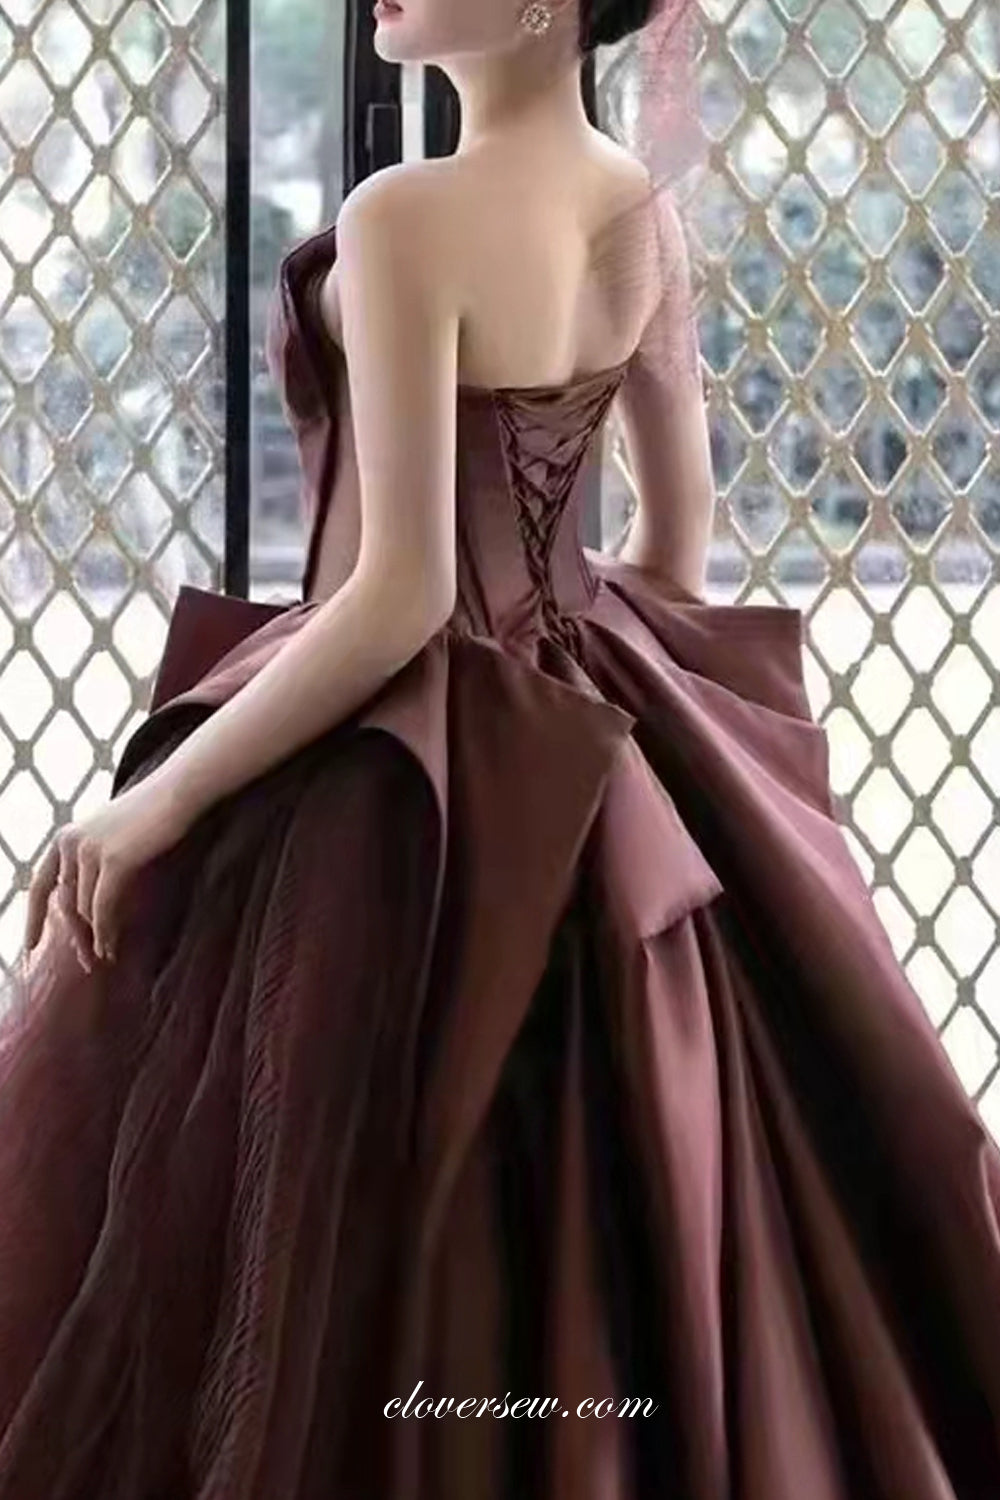 Chocolate Satin Tull Ball Gown Strapless Charming Prom Dresses, CP0794